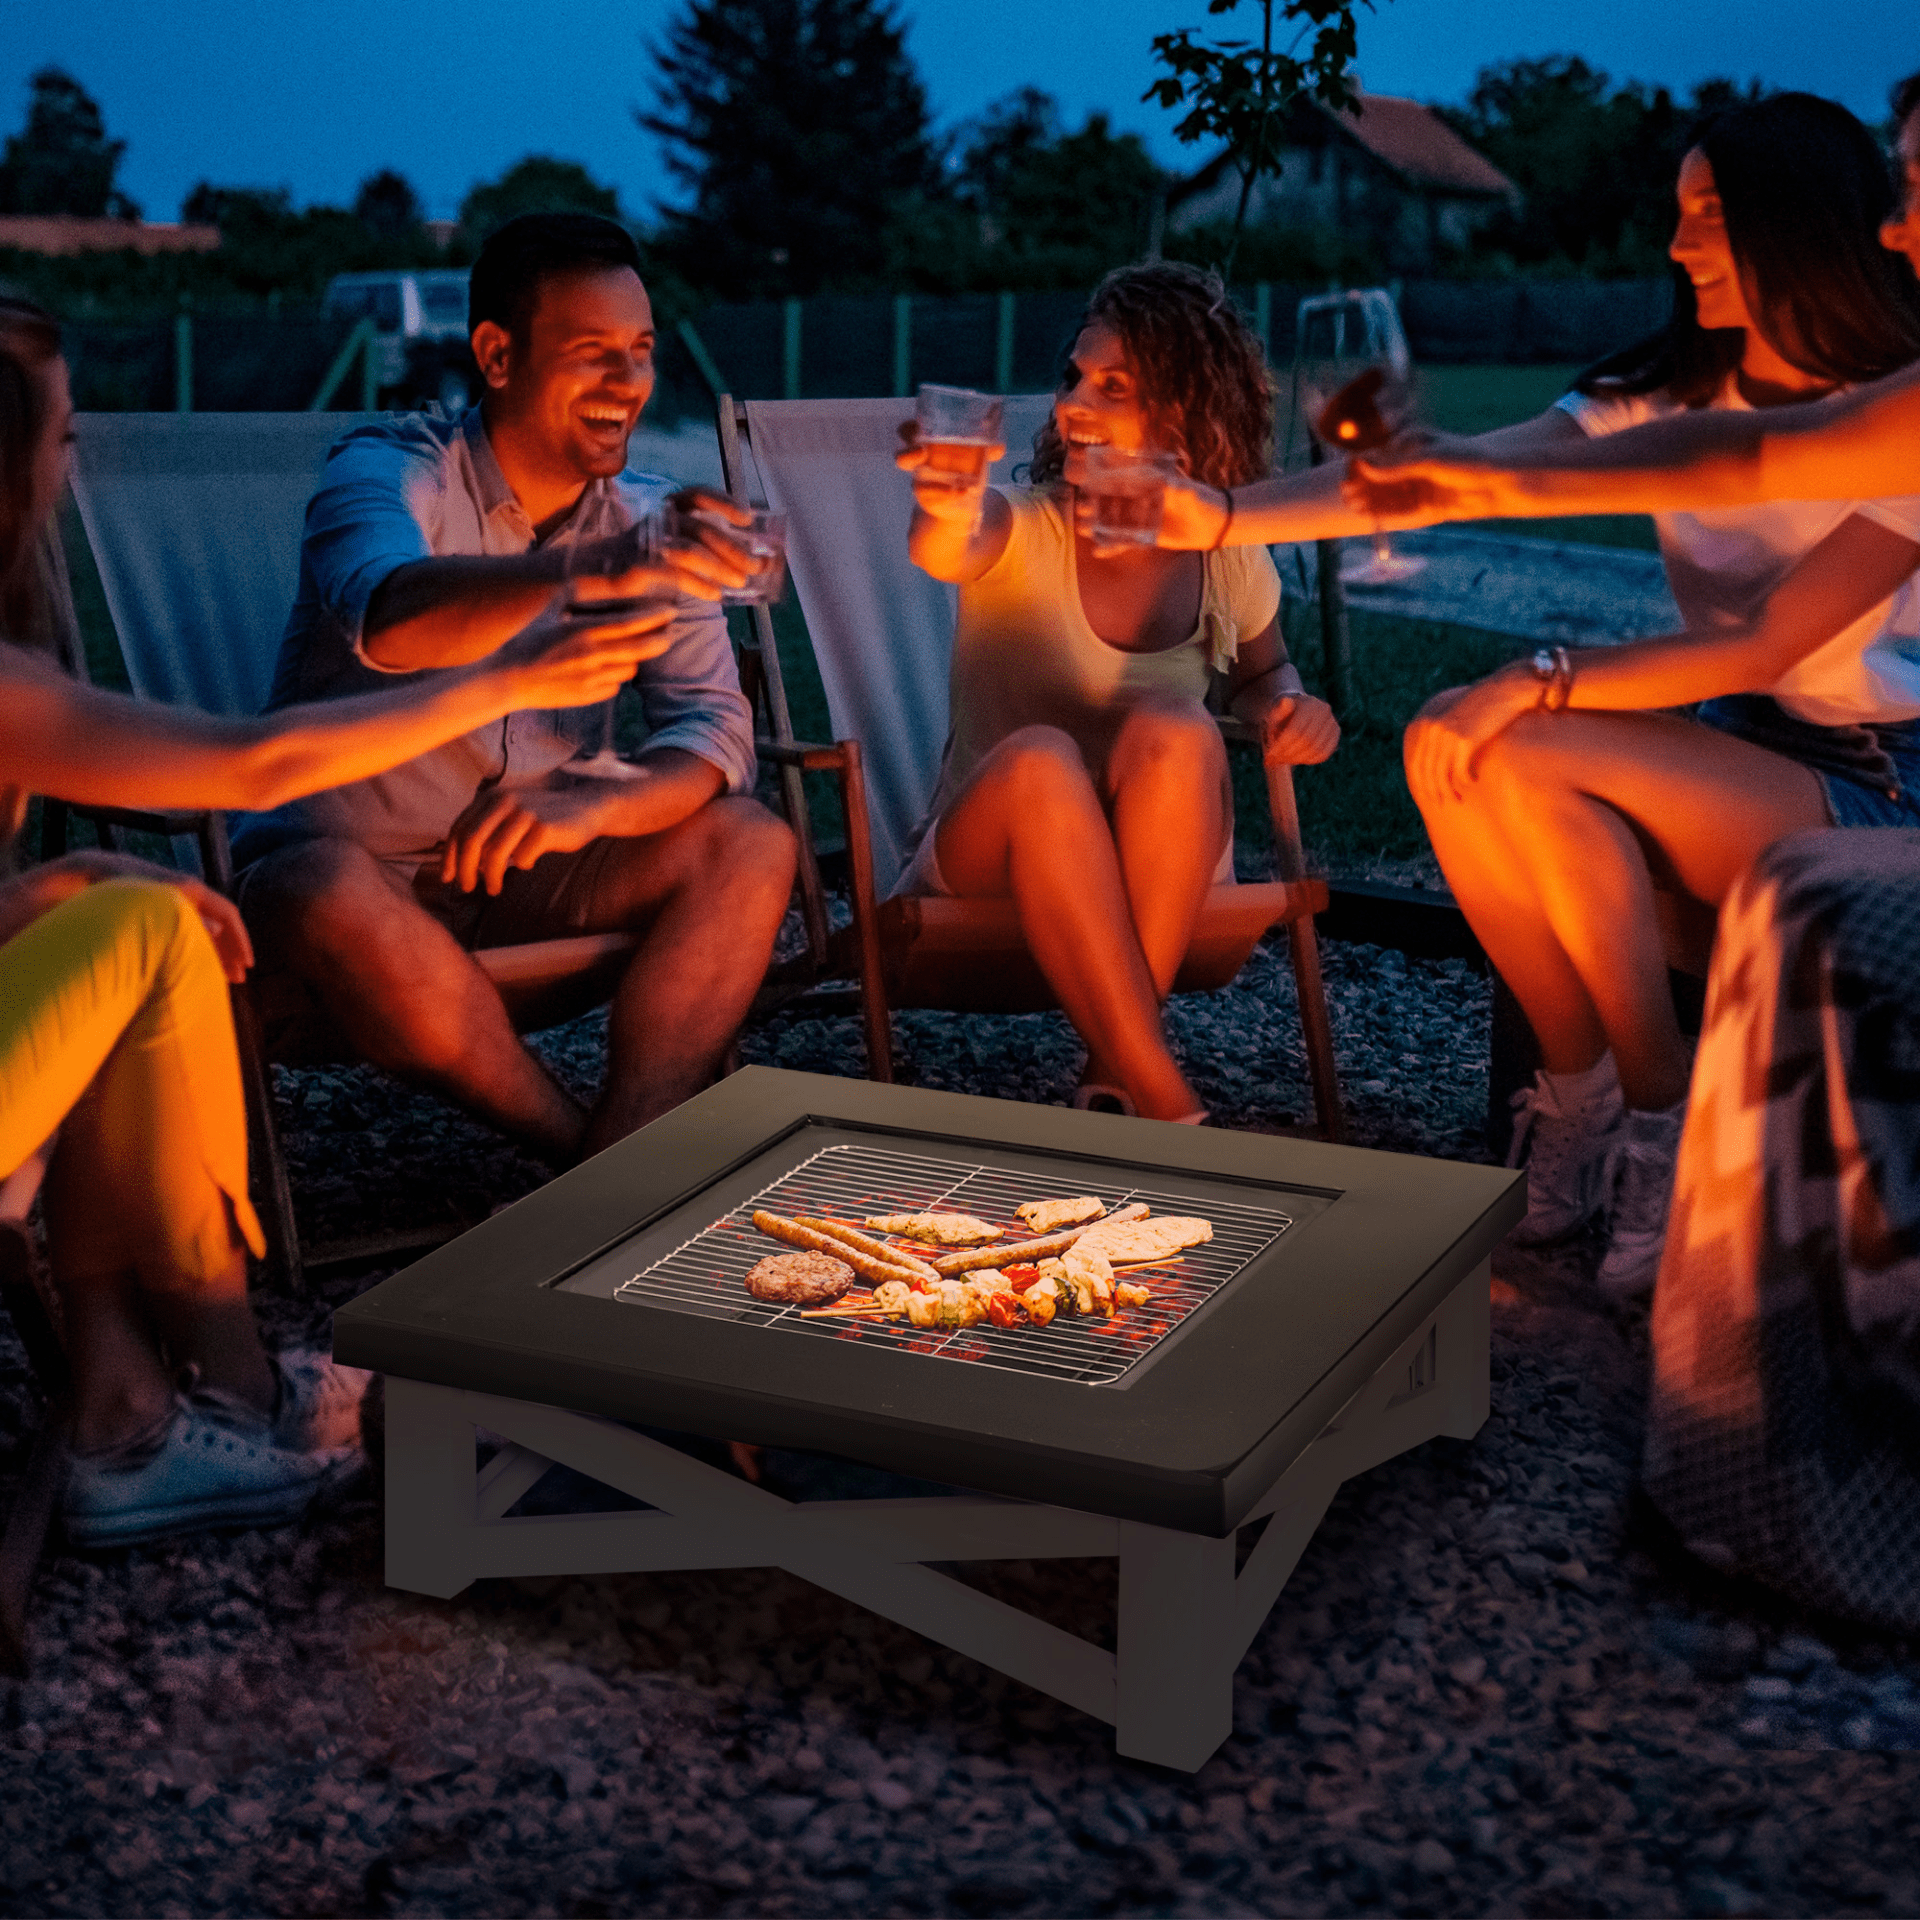 Outsunny Metal Large Firepit Outdoor 3 in 1 Square Fire Pit Brazier with BBQ Grill, Lid, Log Grate, Poker, Black Firepit Cosy Camping Co.   